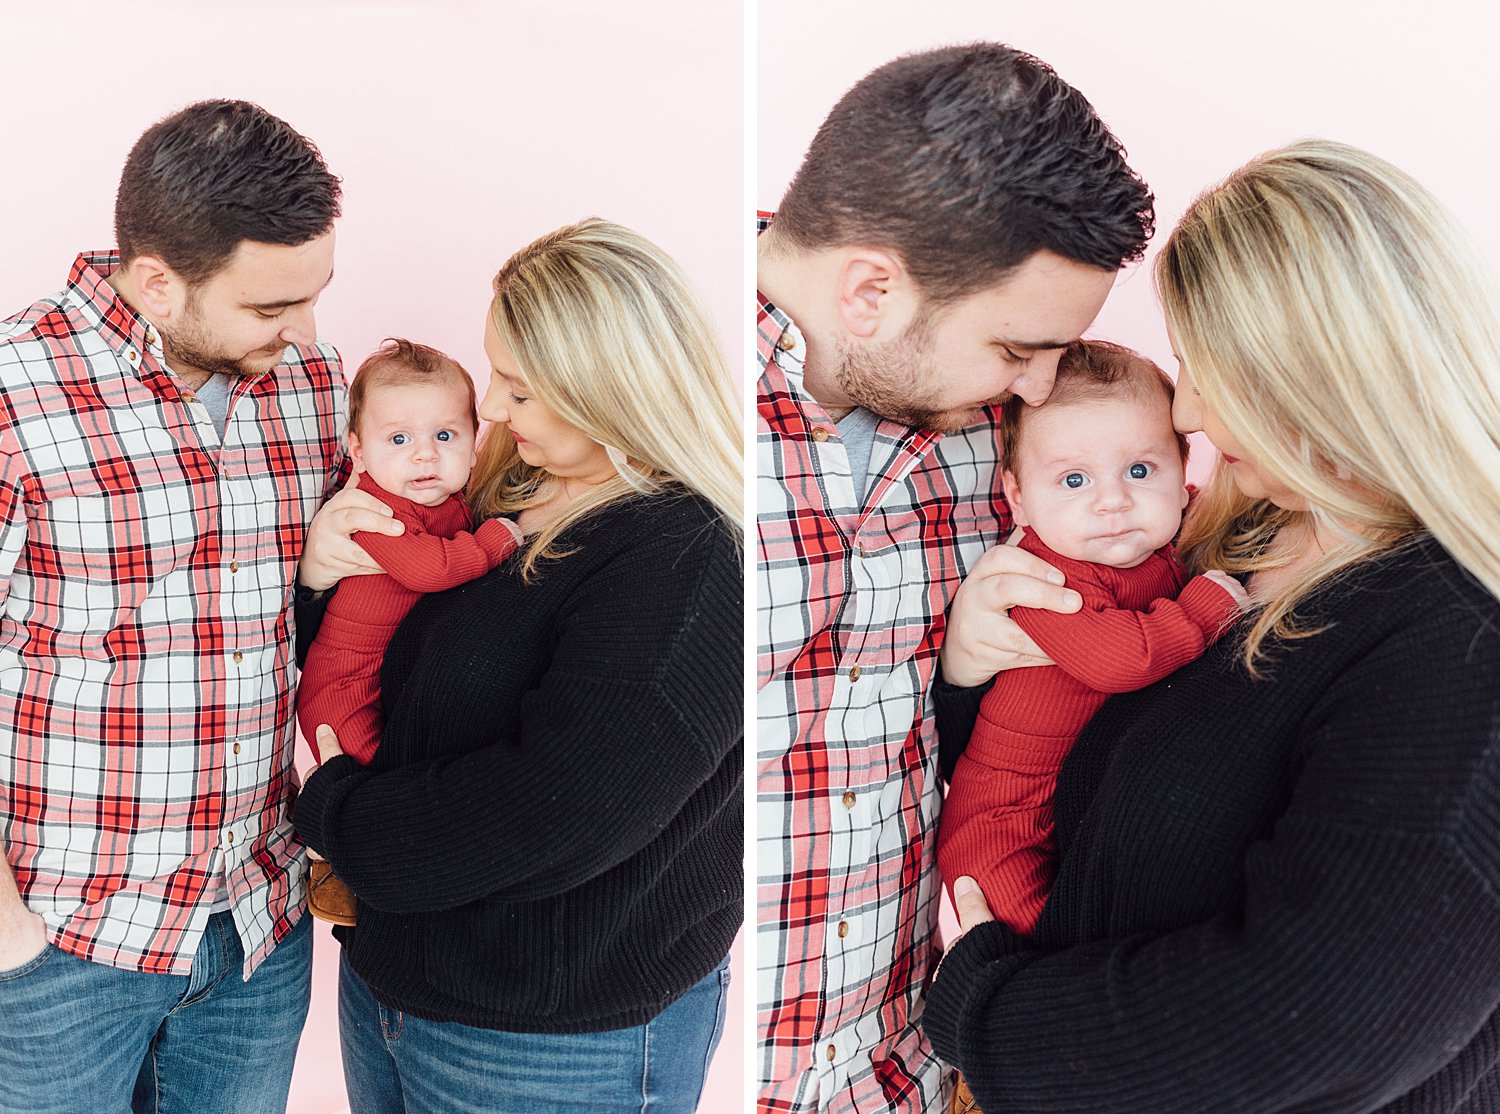 Valentine's Day Studio Mini-Sessions - Rockville Maryland Family Photographer - Alison Dunn Photography photo